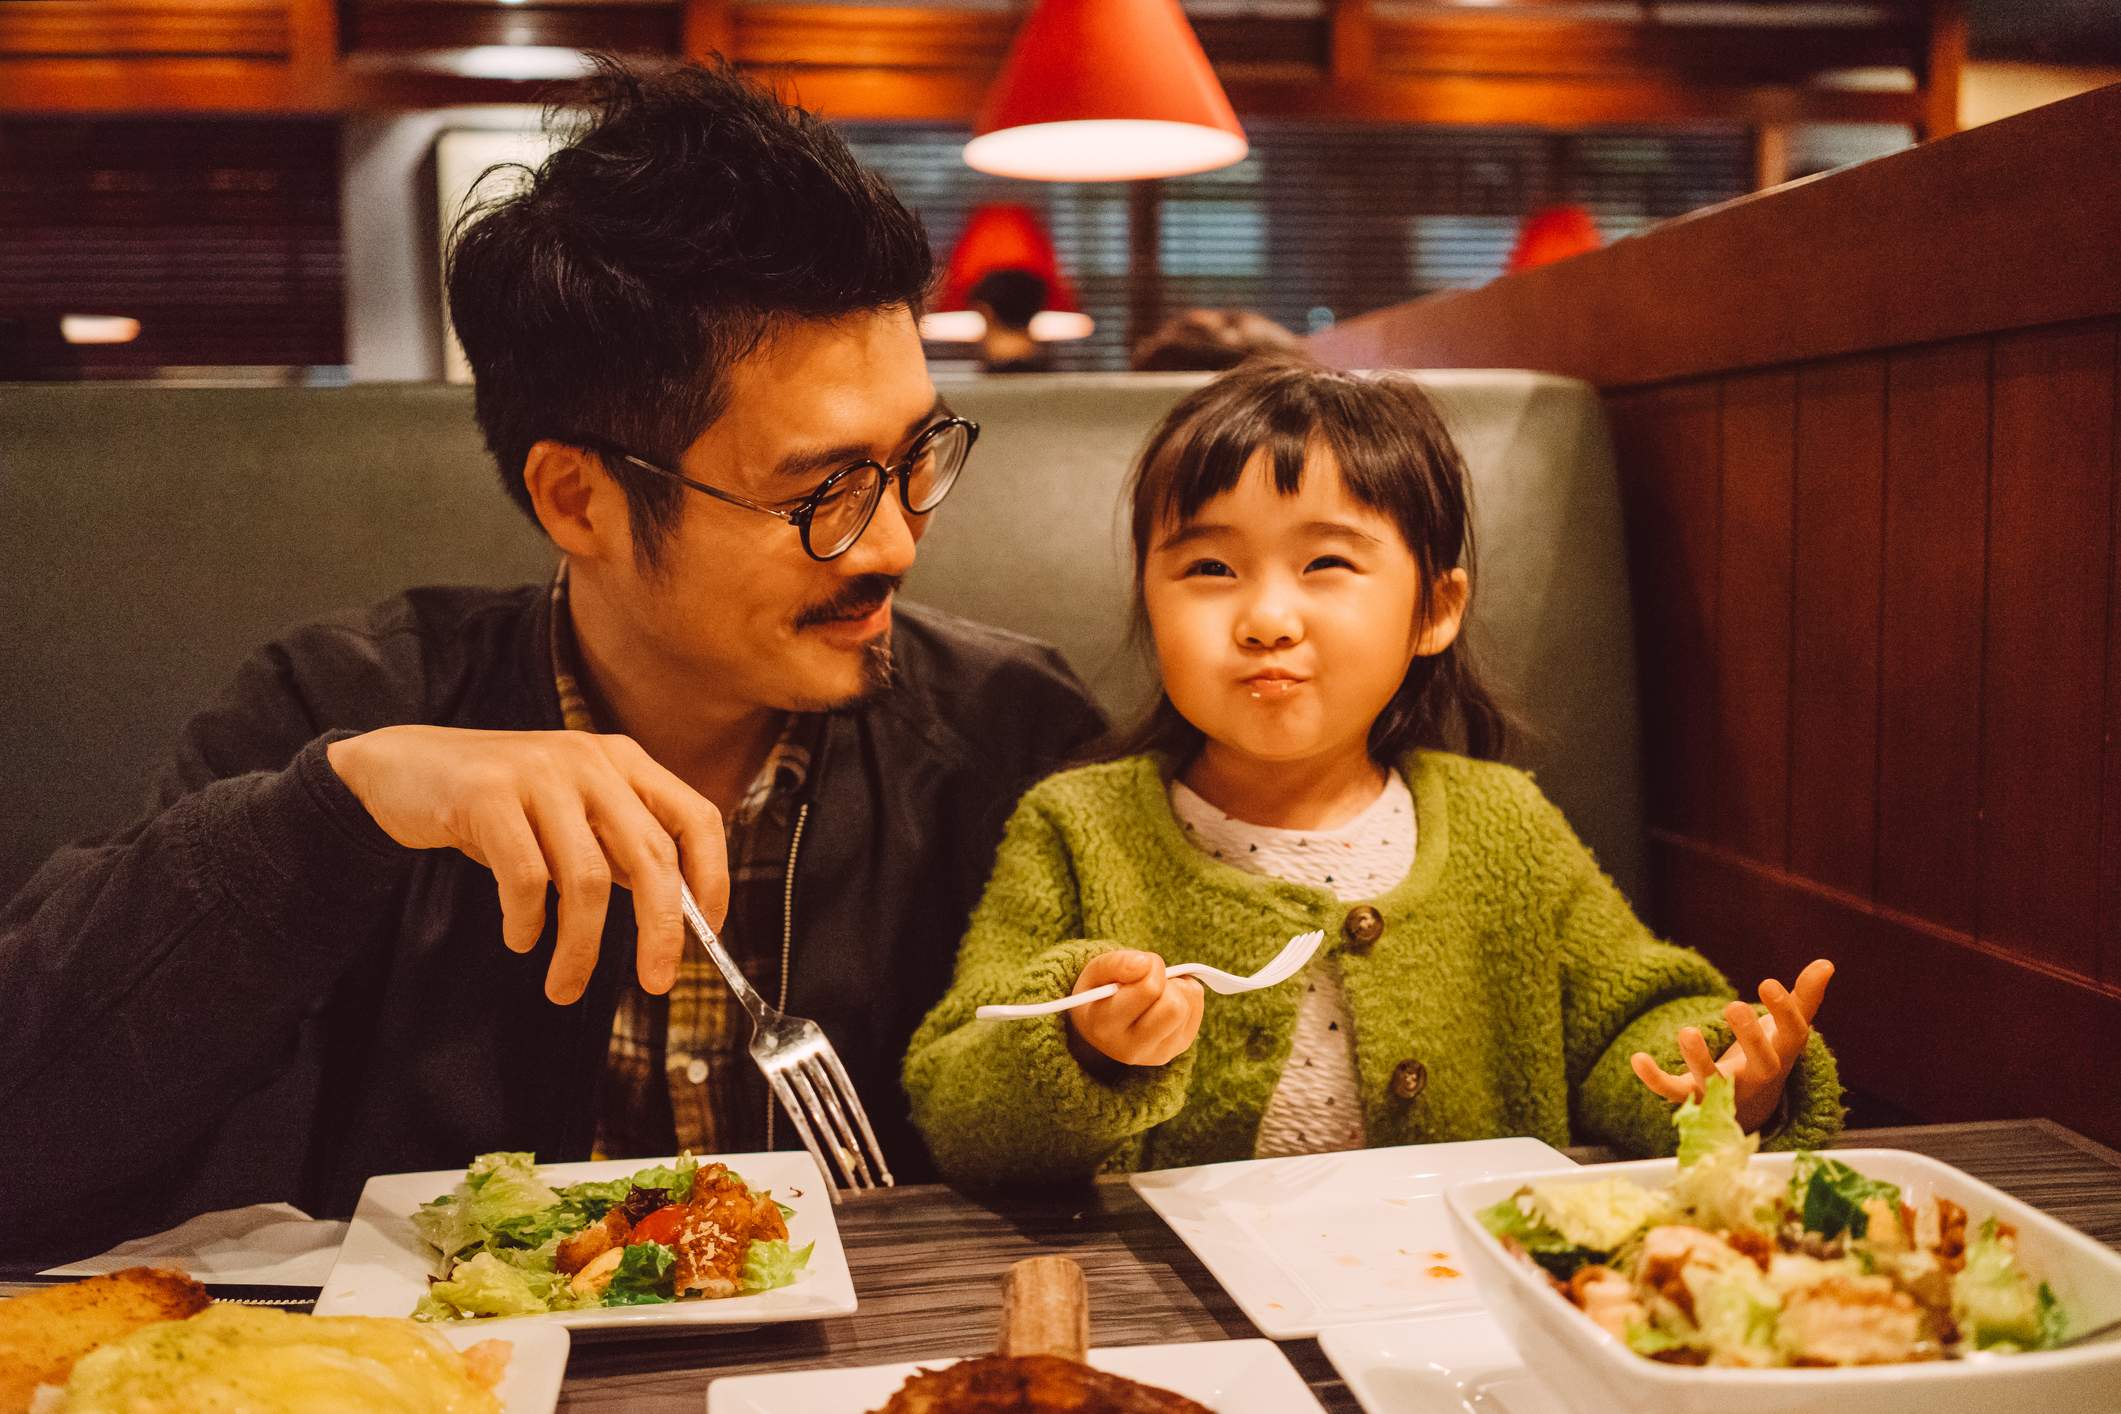 Image depicts a person and a child eating salads at a restaurant.